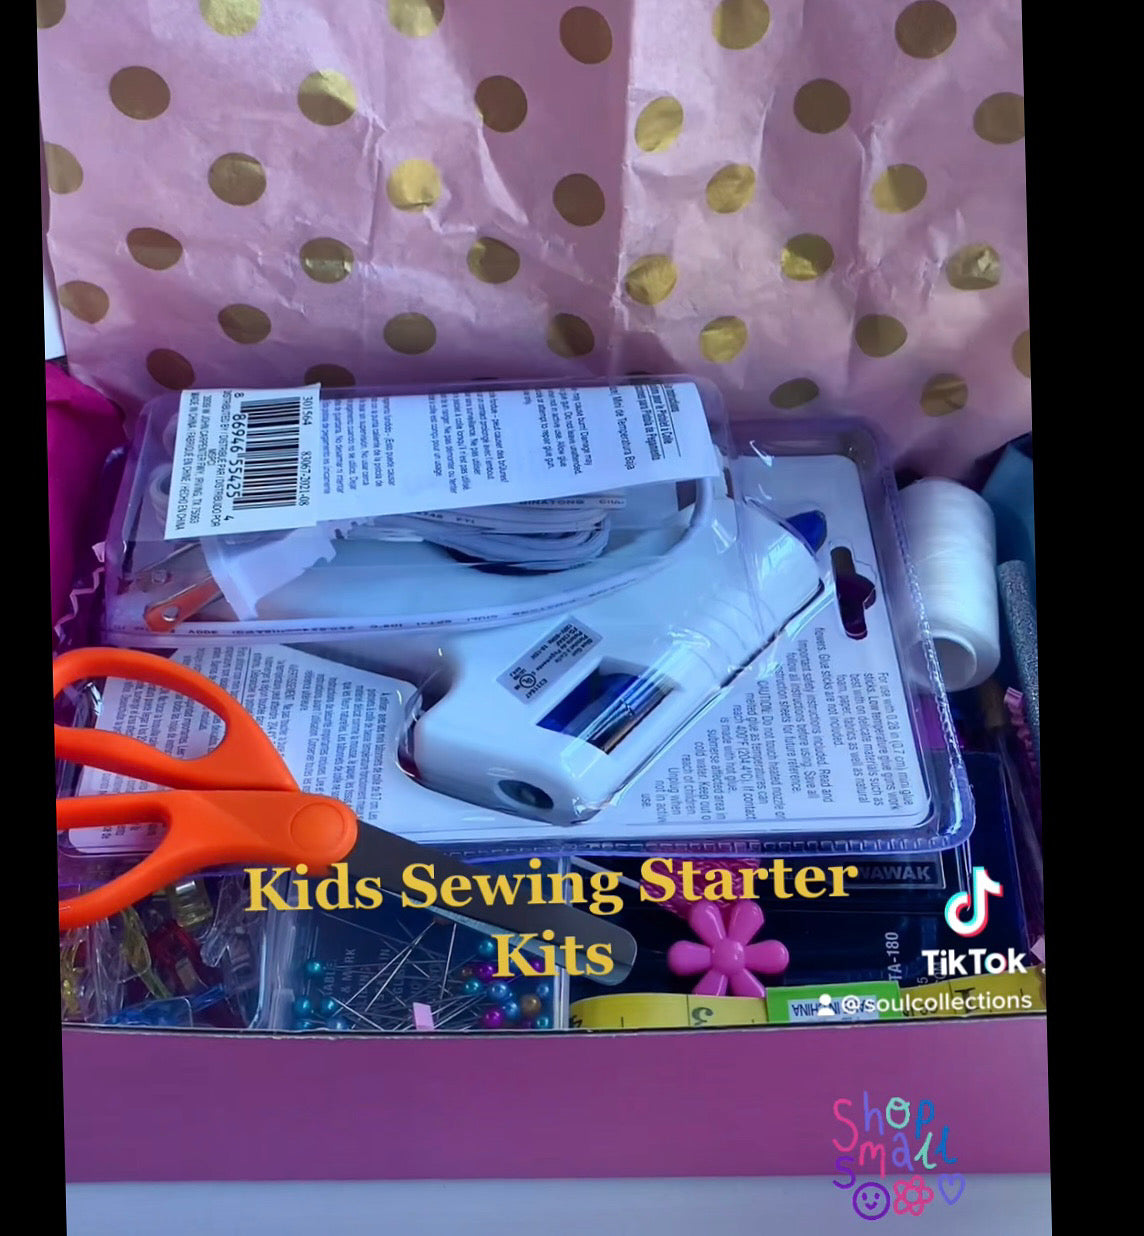 Soul Collection’s Sewing Lounge - Kids Sewing Starter Kits